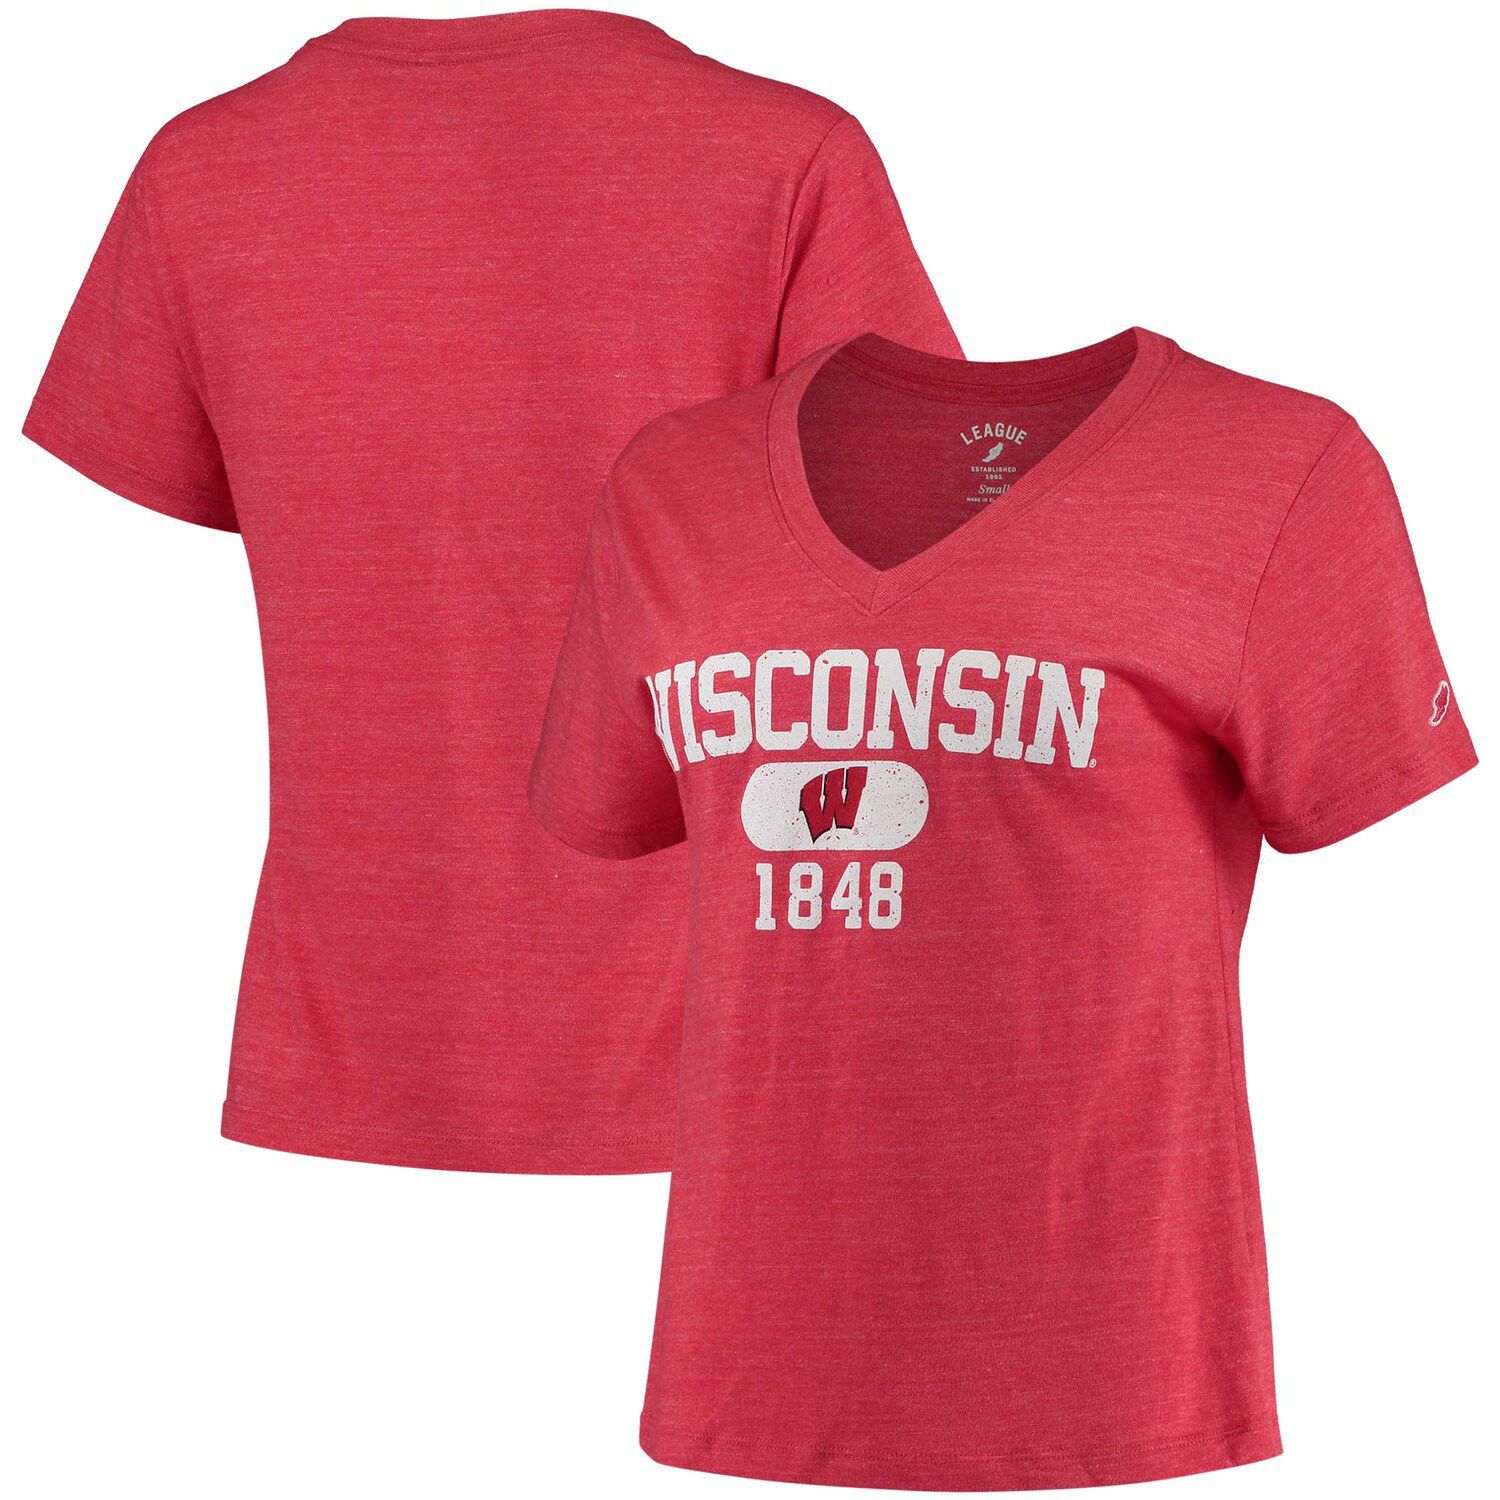 Image for Unbranded Women's League Collegiate Wear Heathered Red Wisconsin Badgers Intramural Boyfriend Tri-Blend V-Neck T-Shirt at Kohl's.